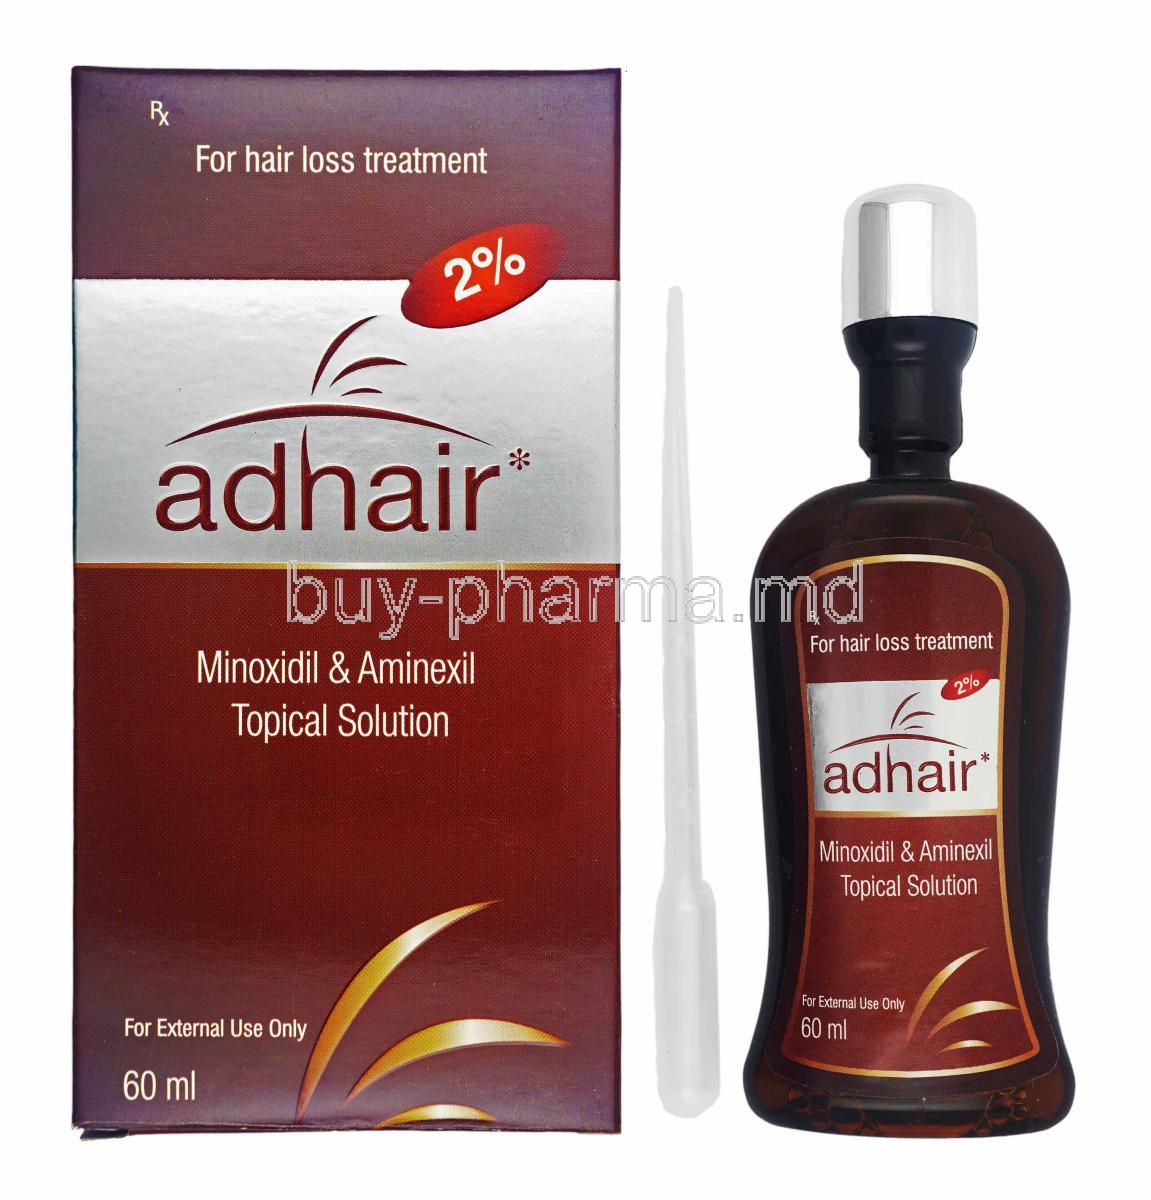 Adhair Solution, Minoxidil 2% and Aminexil box and bottle